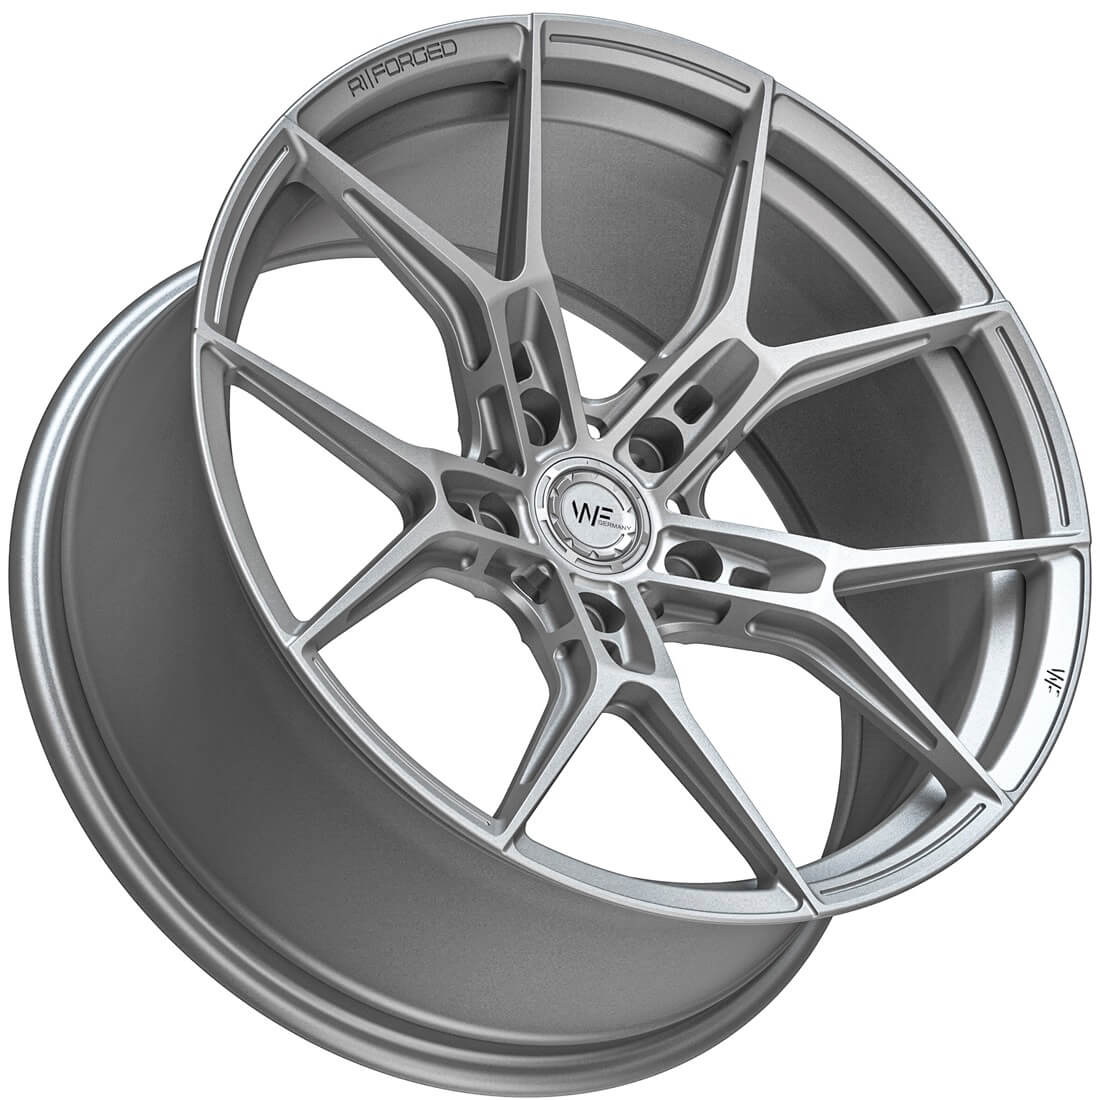 WF RACE.ONE | FORGED - FROZEN SILVER 9.0x19 ET44 5x112 FC - TTRS/RS3 Lim. Edition